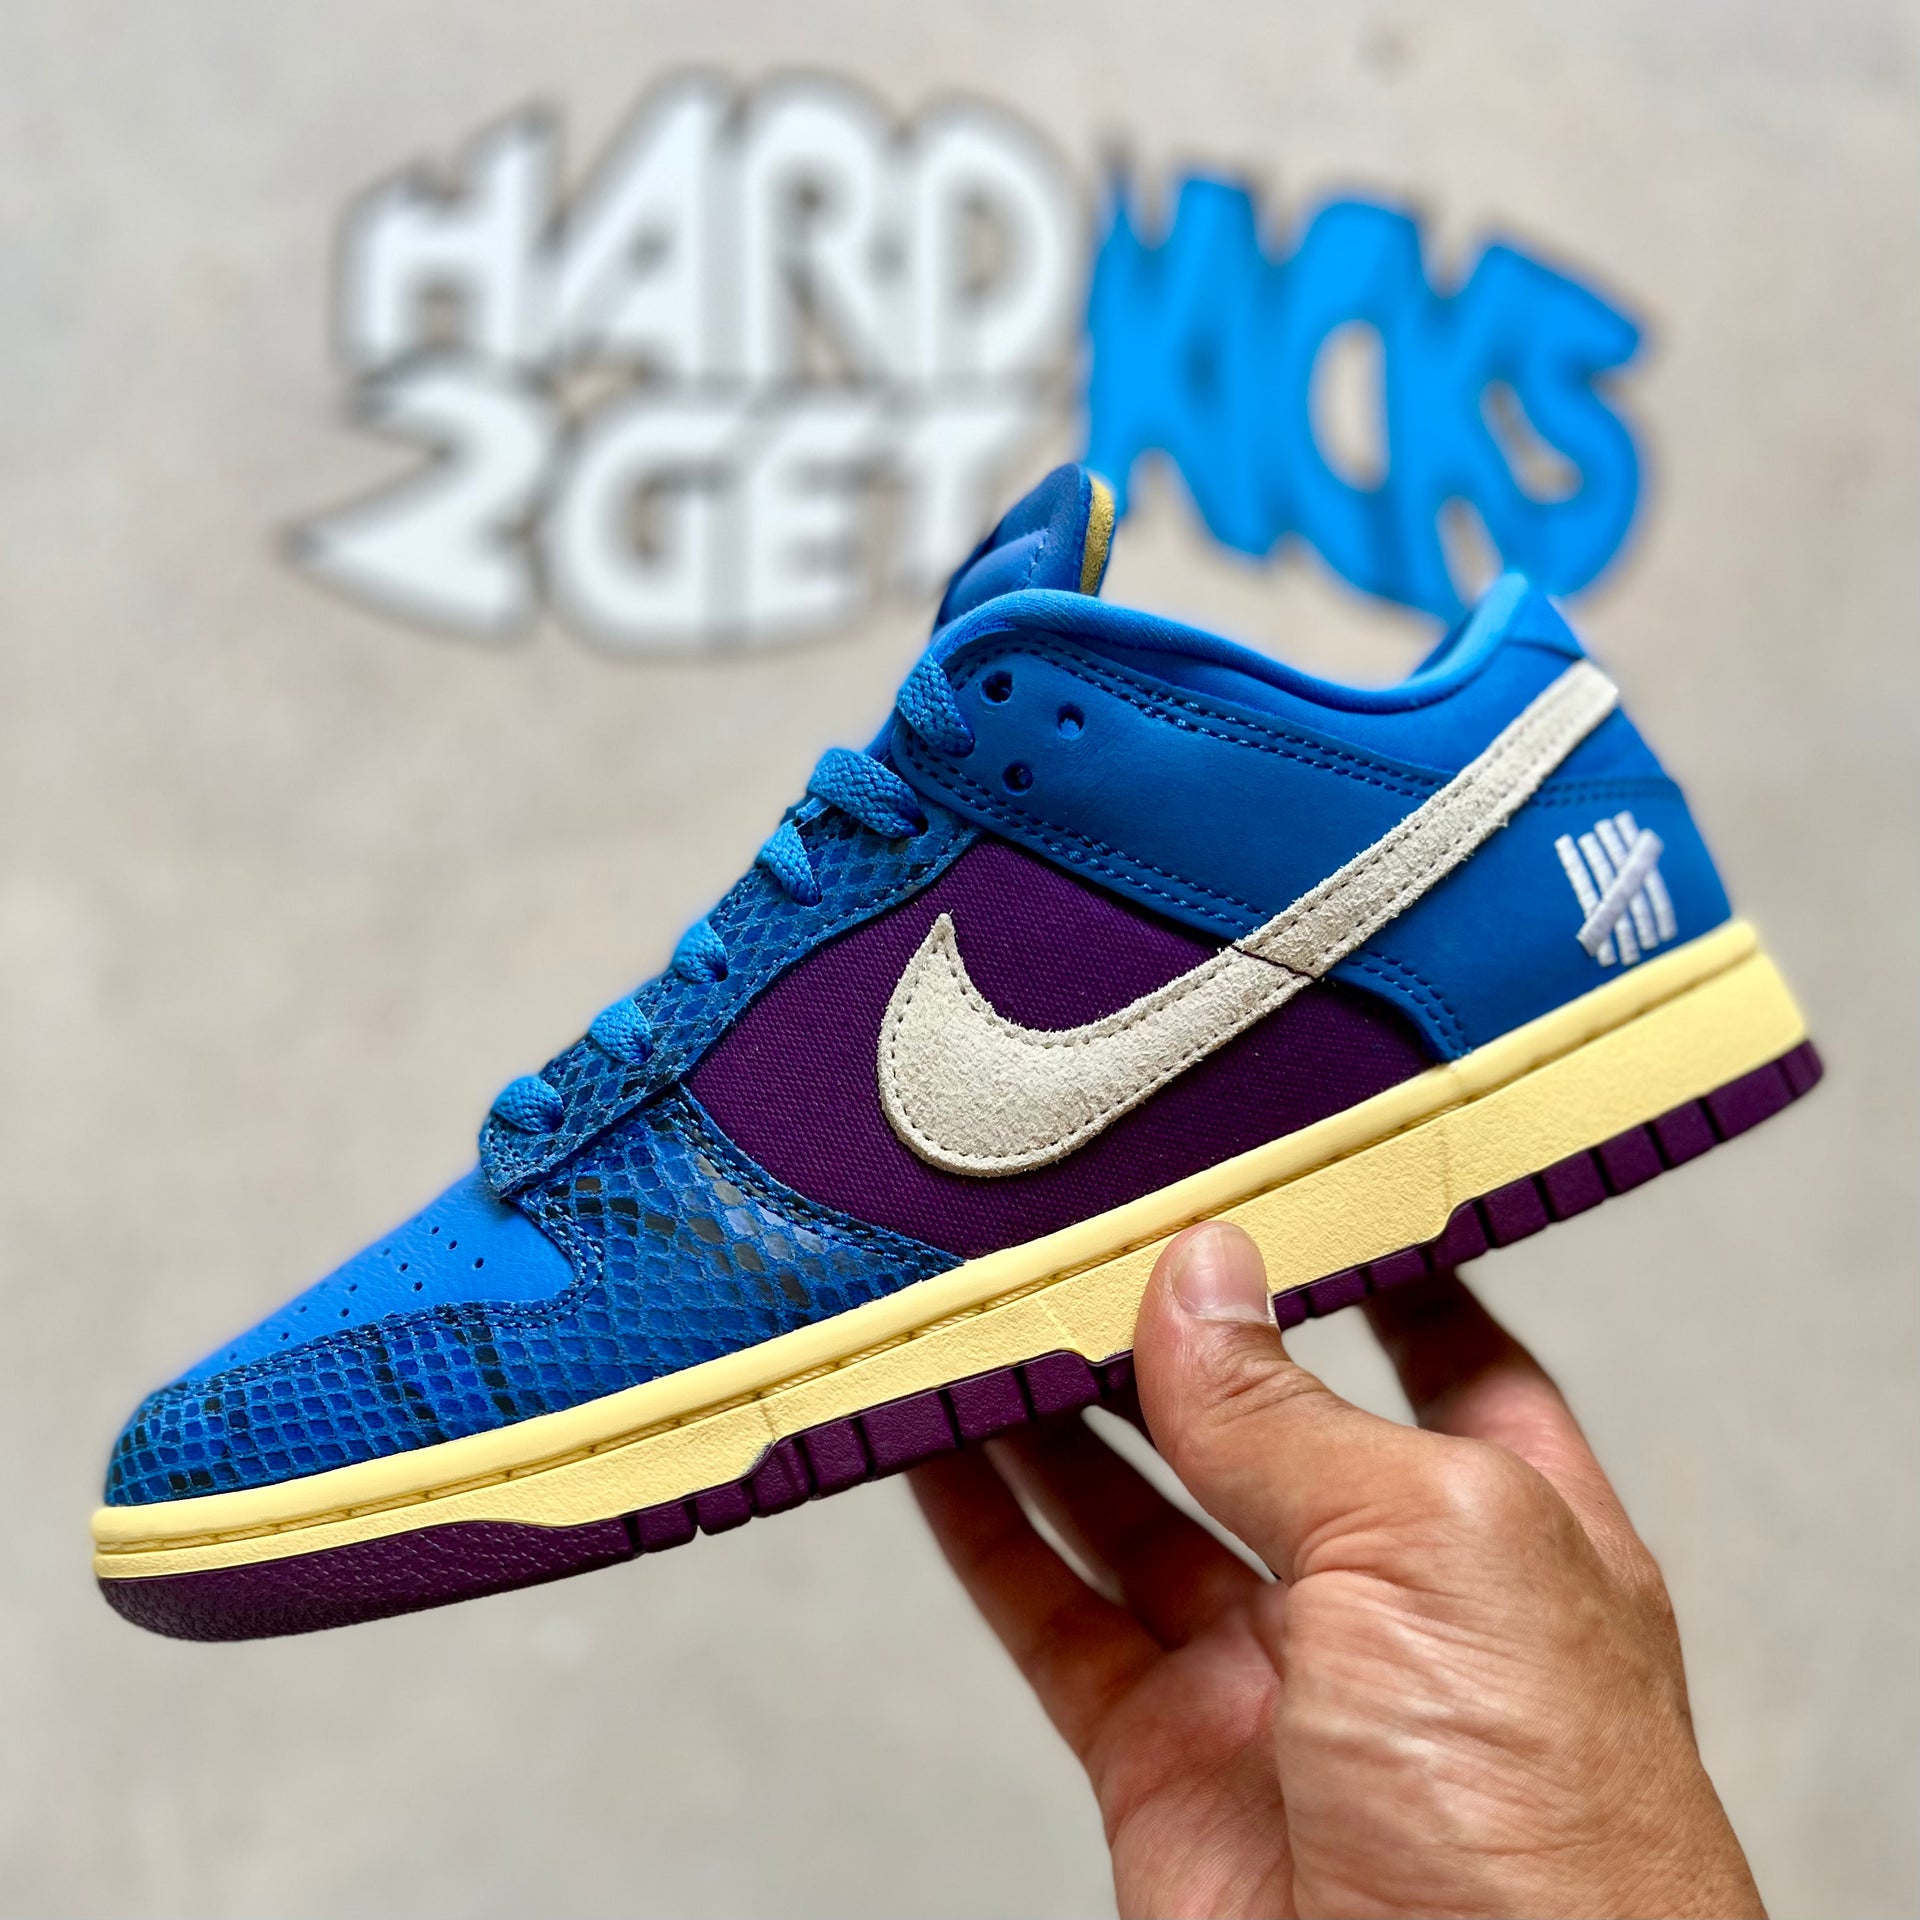 Nike Dunk Low SP - Undefeated “5 On It” – Hard2getkicks